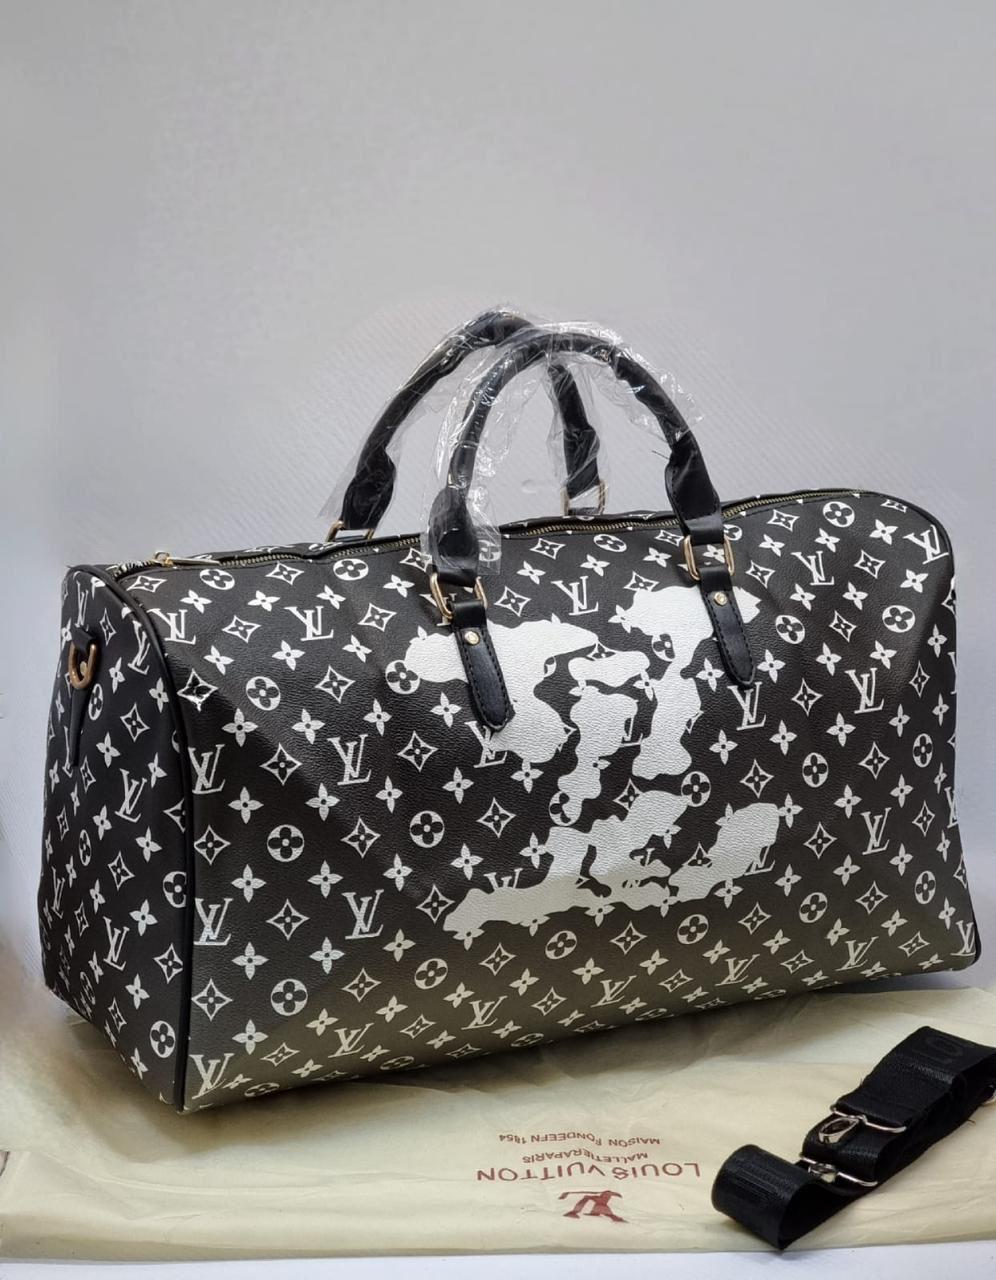 Unleash Your Wild Side: Travel in Style with these Duffel Bag